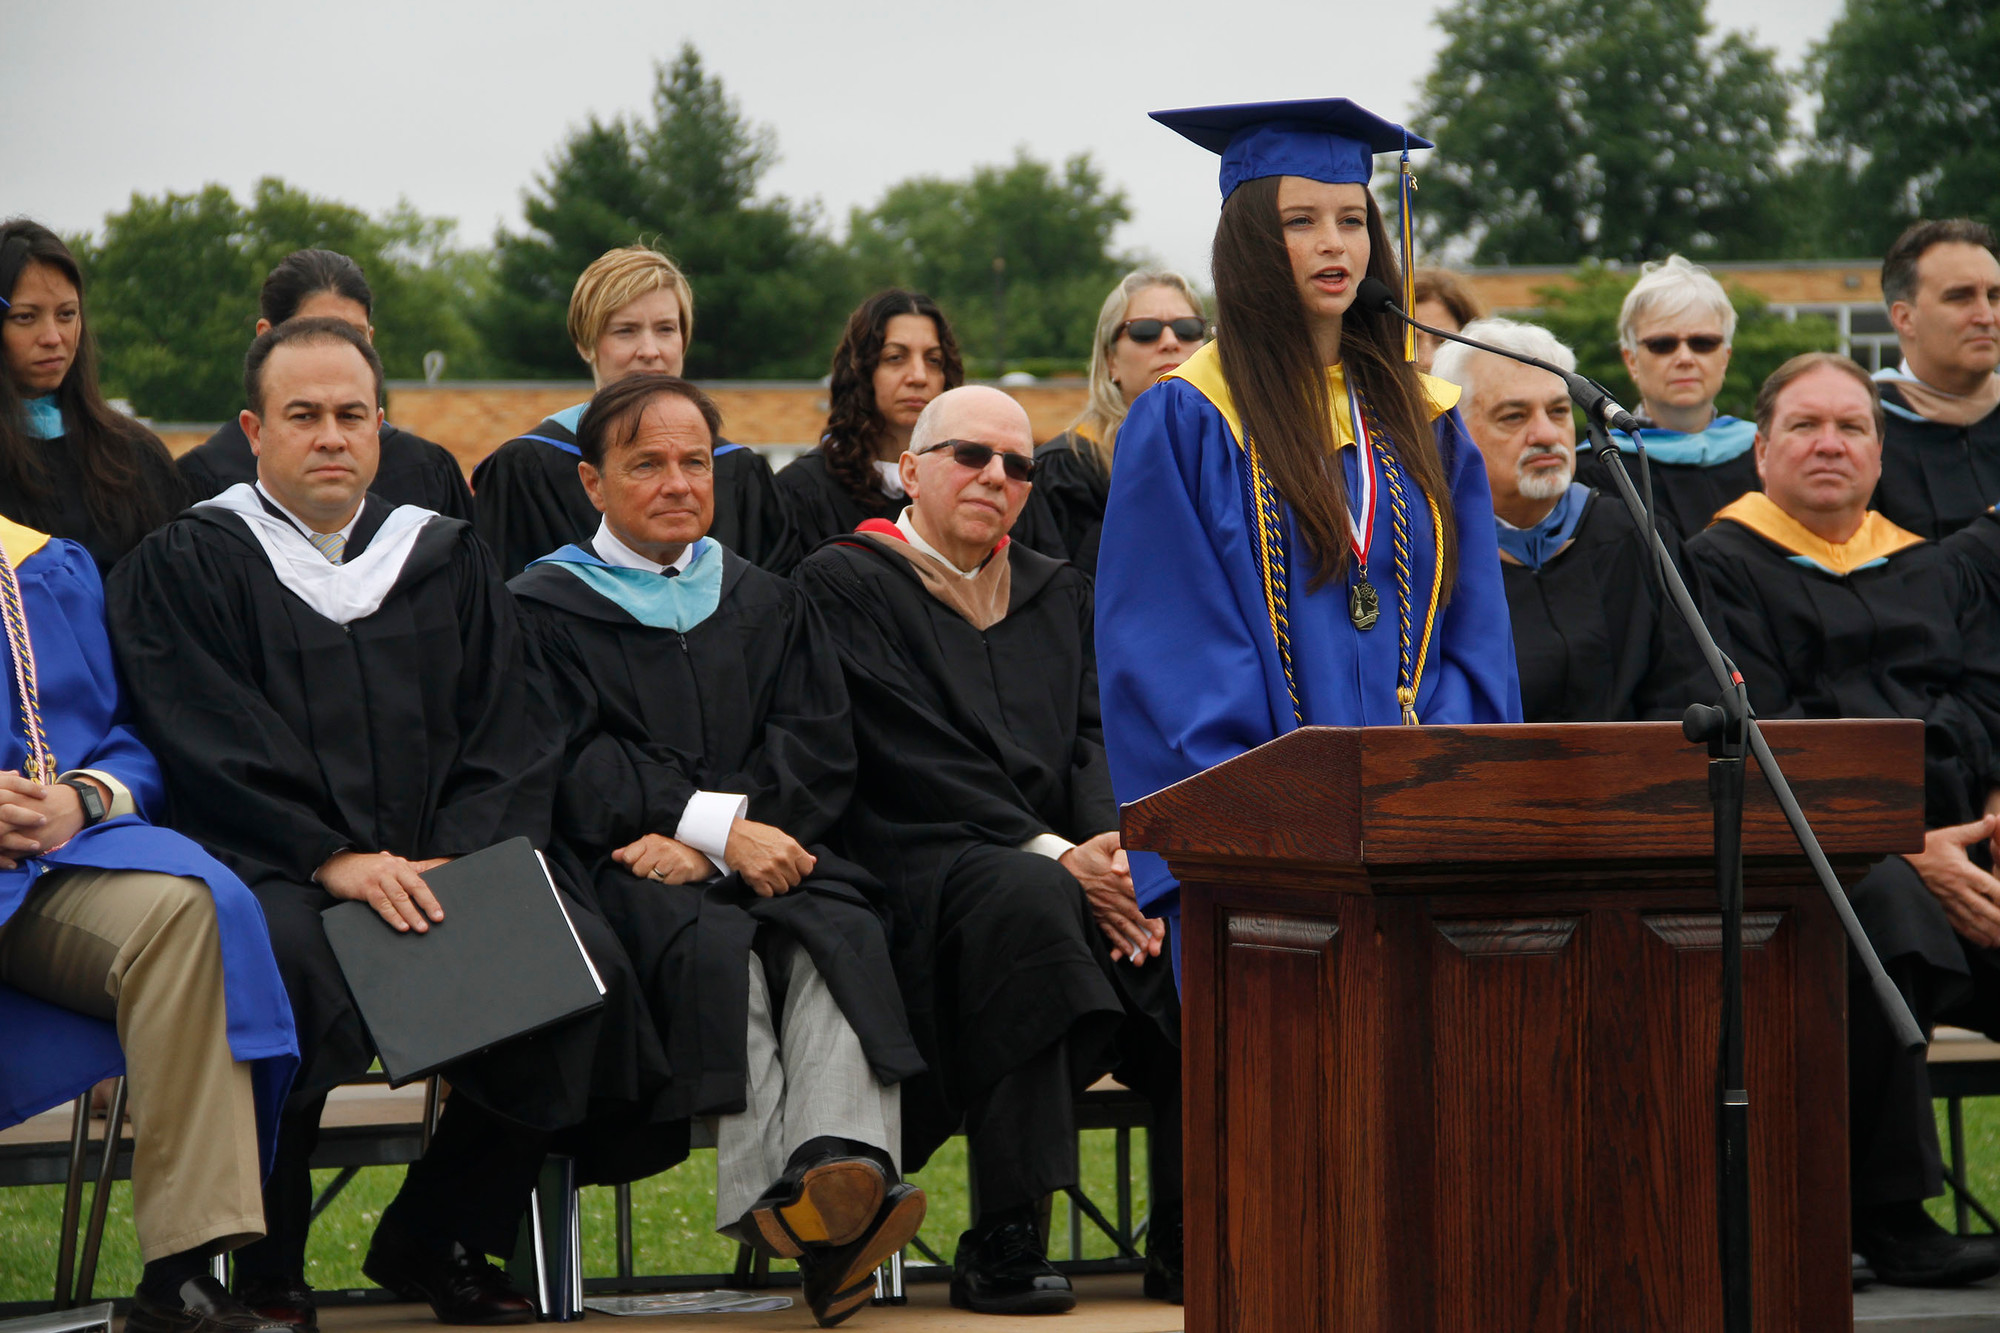 Salutatorian Allyson Clark said being a student at East Meadow High has "Taught me to never give up, even when defeat seems inevitable."